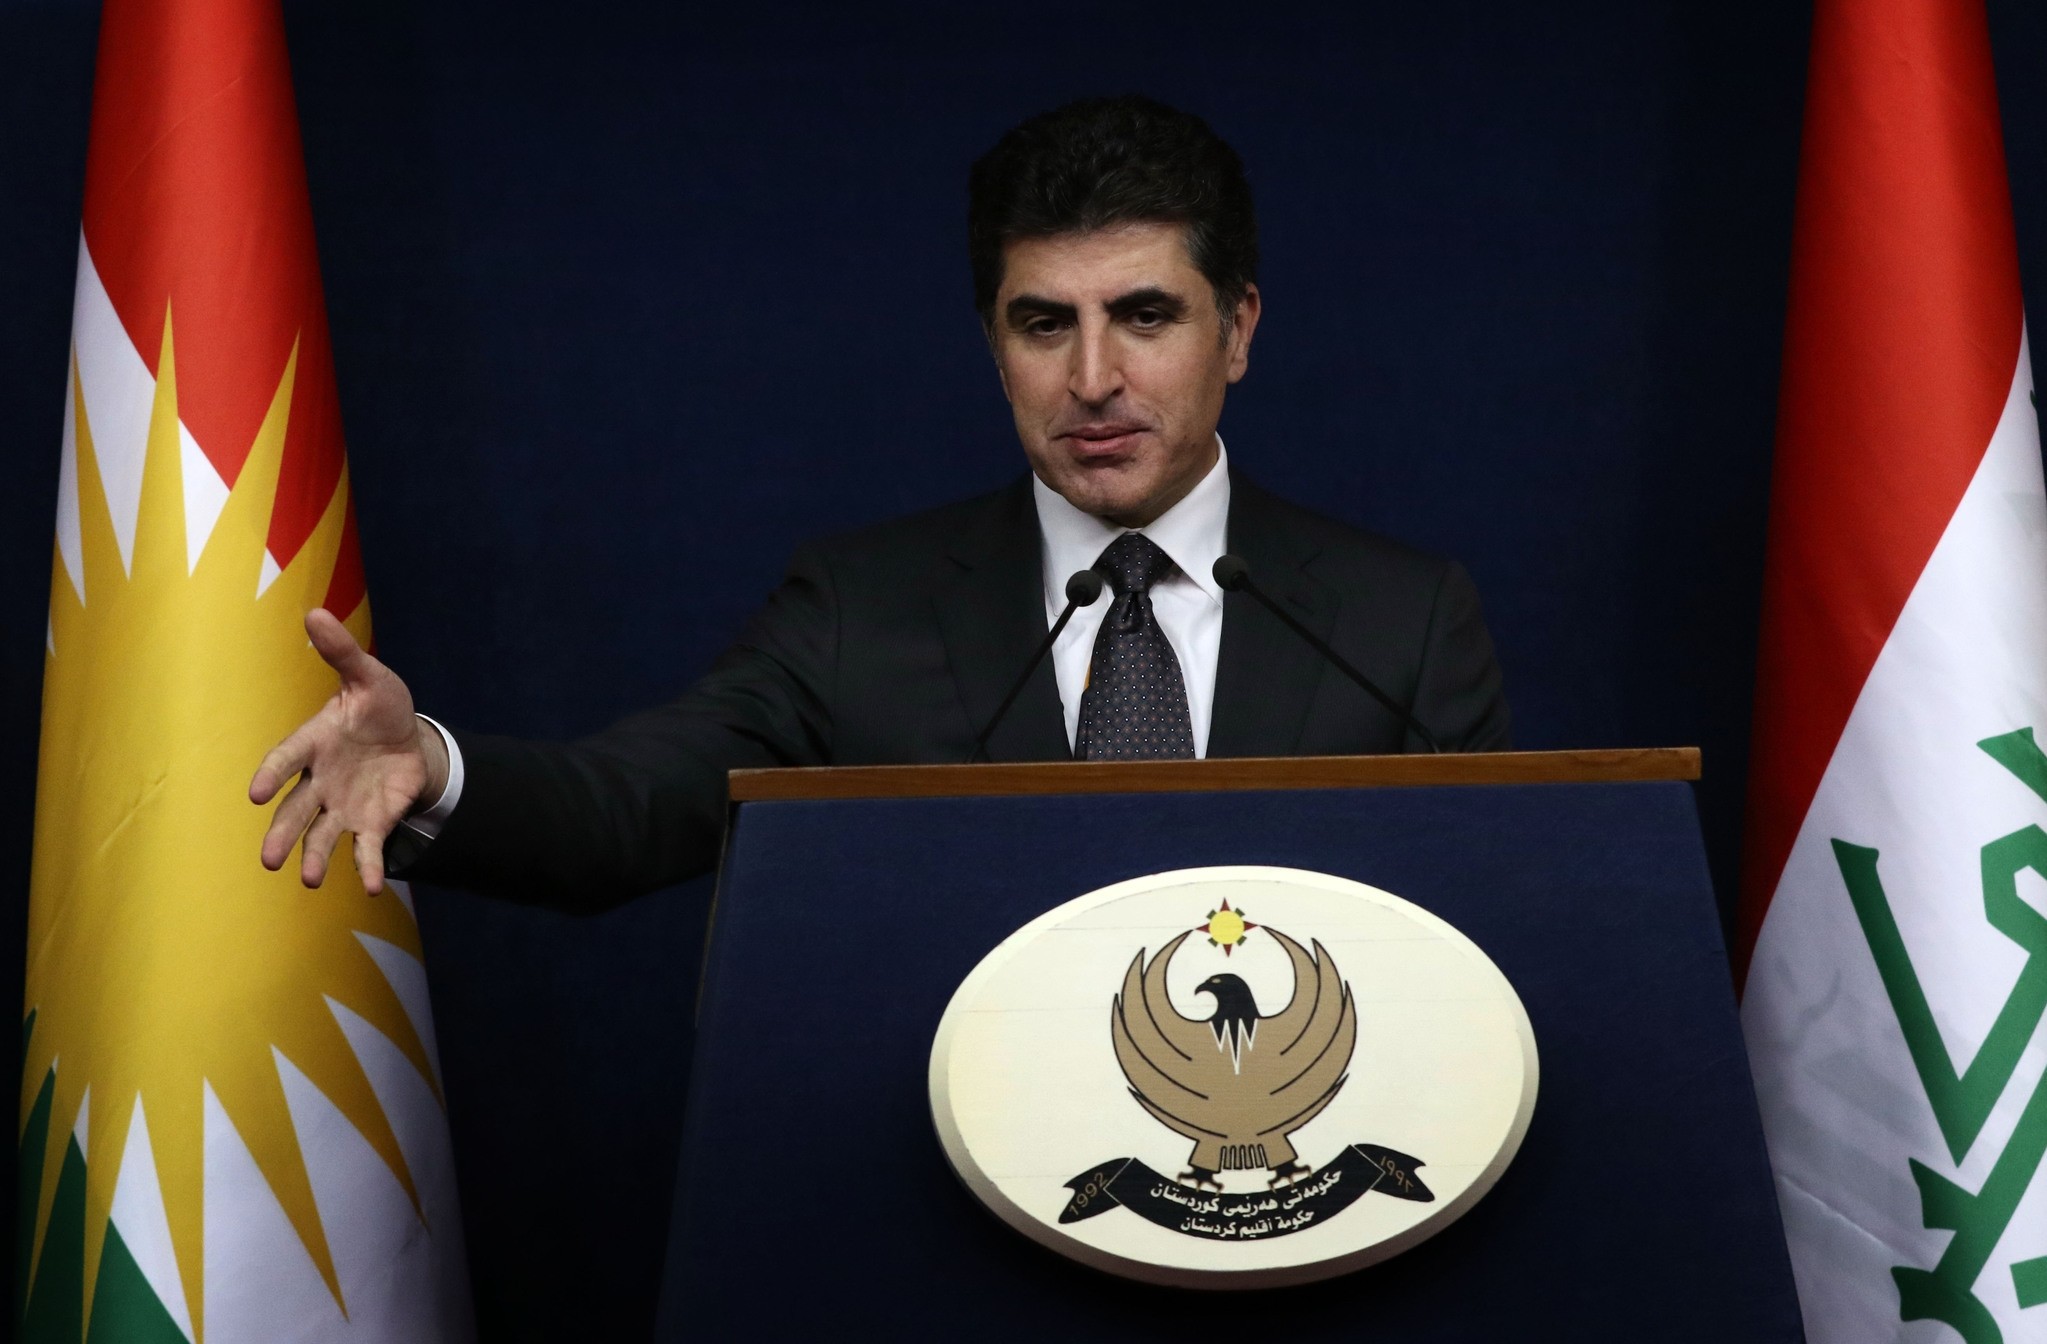 Nechirvan Barzani, prime minister of Iraq's Kurdistan Regional Government (KRG), speaks during a press conference in the northern Iraqi city of Arbil, on November 6, 2017. (AFP PHOTO)